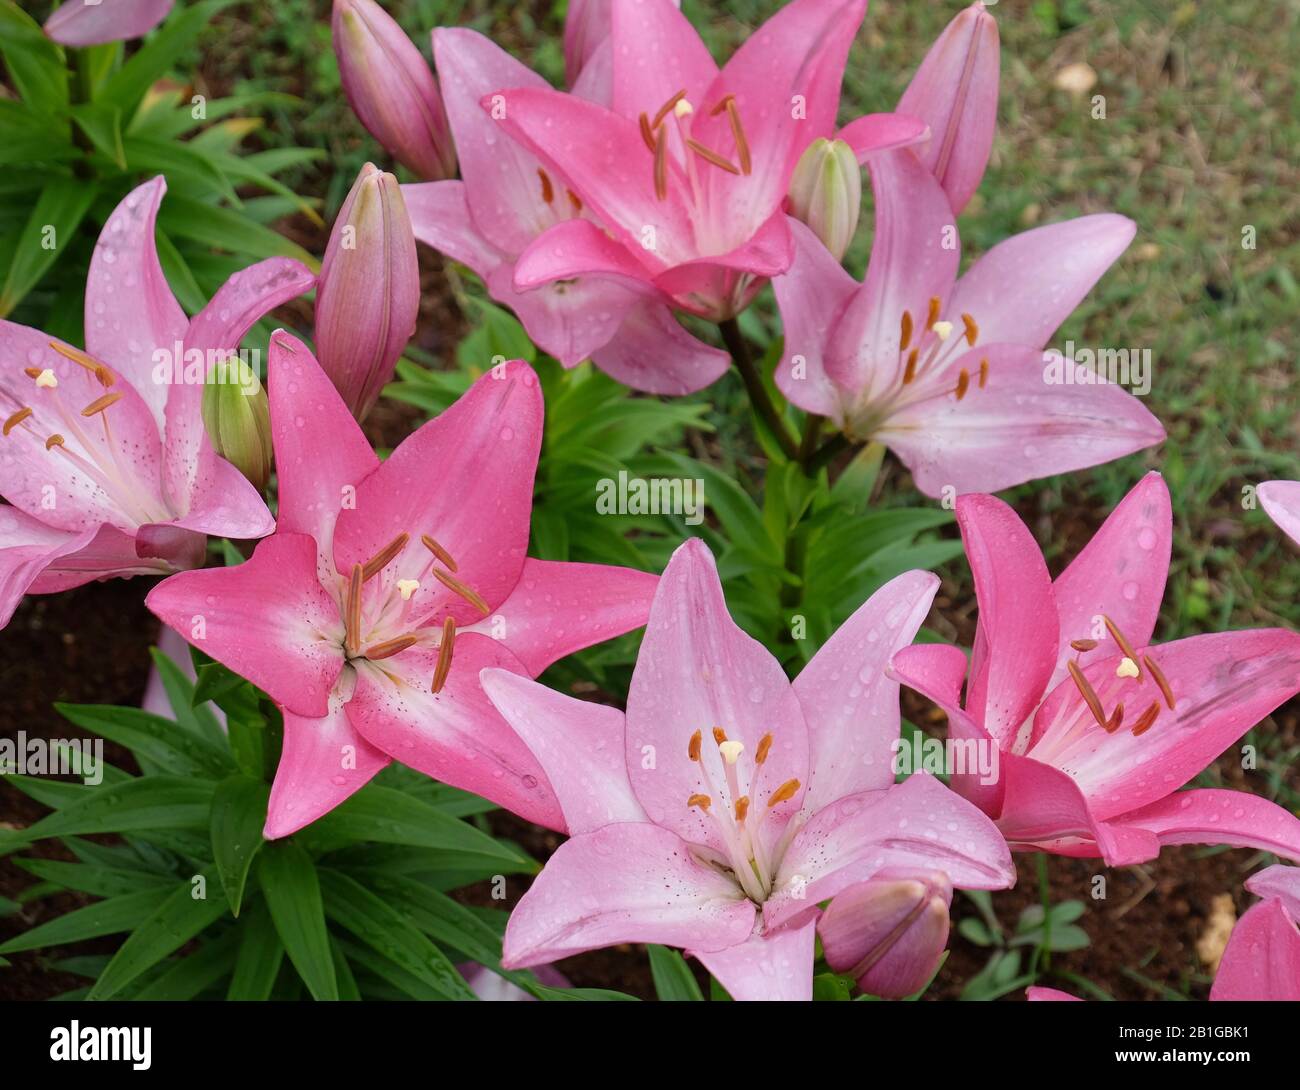 Group of Pink Lilies Stock Photo